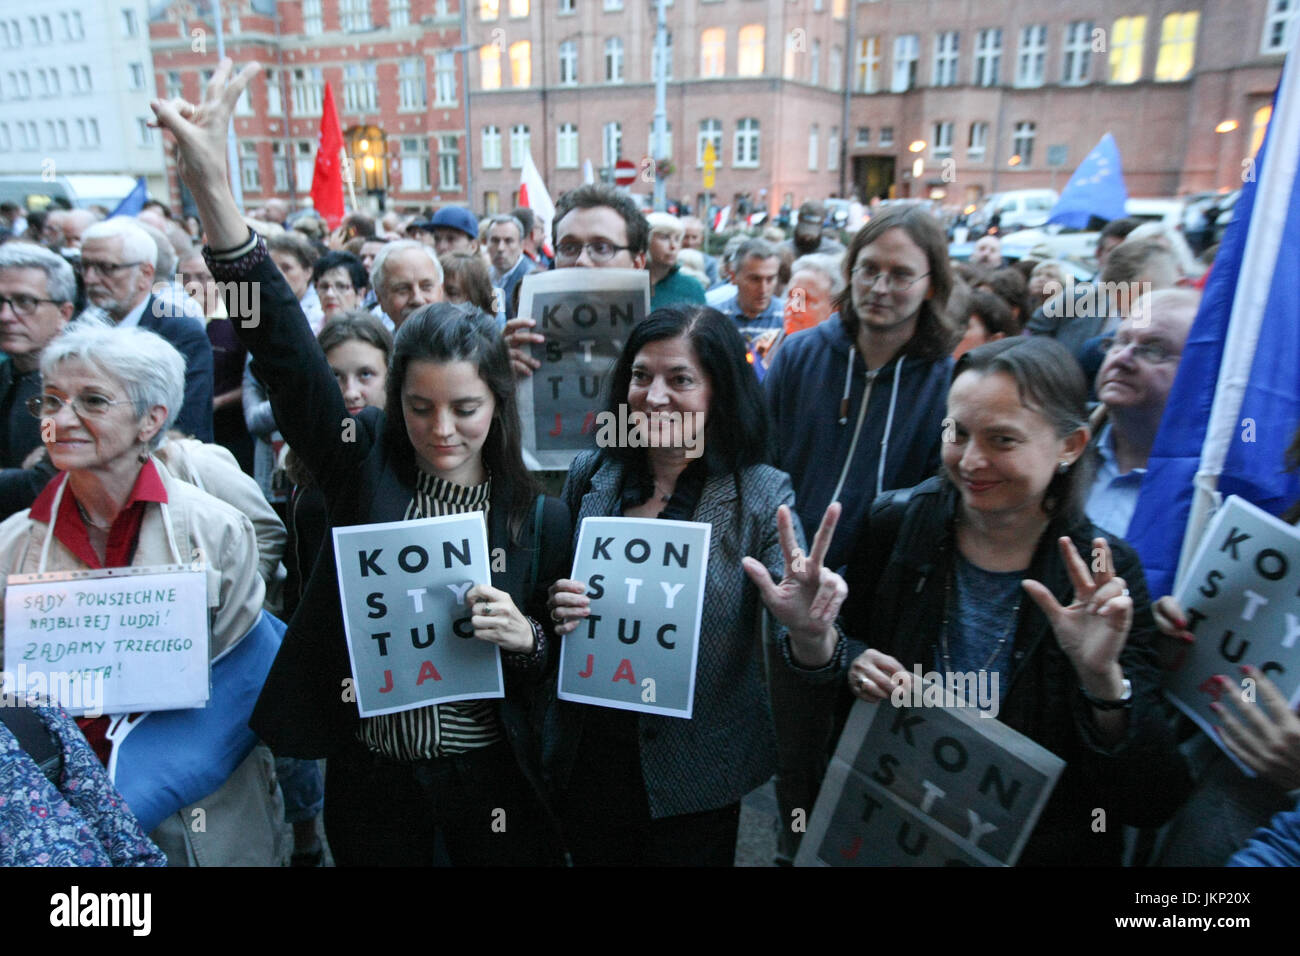 Gdansk, Poland. 24th July, 2017. Protesters in front of Gdansk Regional Court are seen in Gdansk, Poland on 24 July 2017  Crowds gathered outside the Regional Court and other cities around the country to protest at government plans fof changes to Poland’s judicial system despite to Presidential veto on two of three controversial legal changes. Protesters argued the changes would limit judicial independence and threaten the separation of powers in the country. Credit: Michal Fludra/Alamy Live News Stock Photo